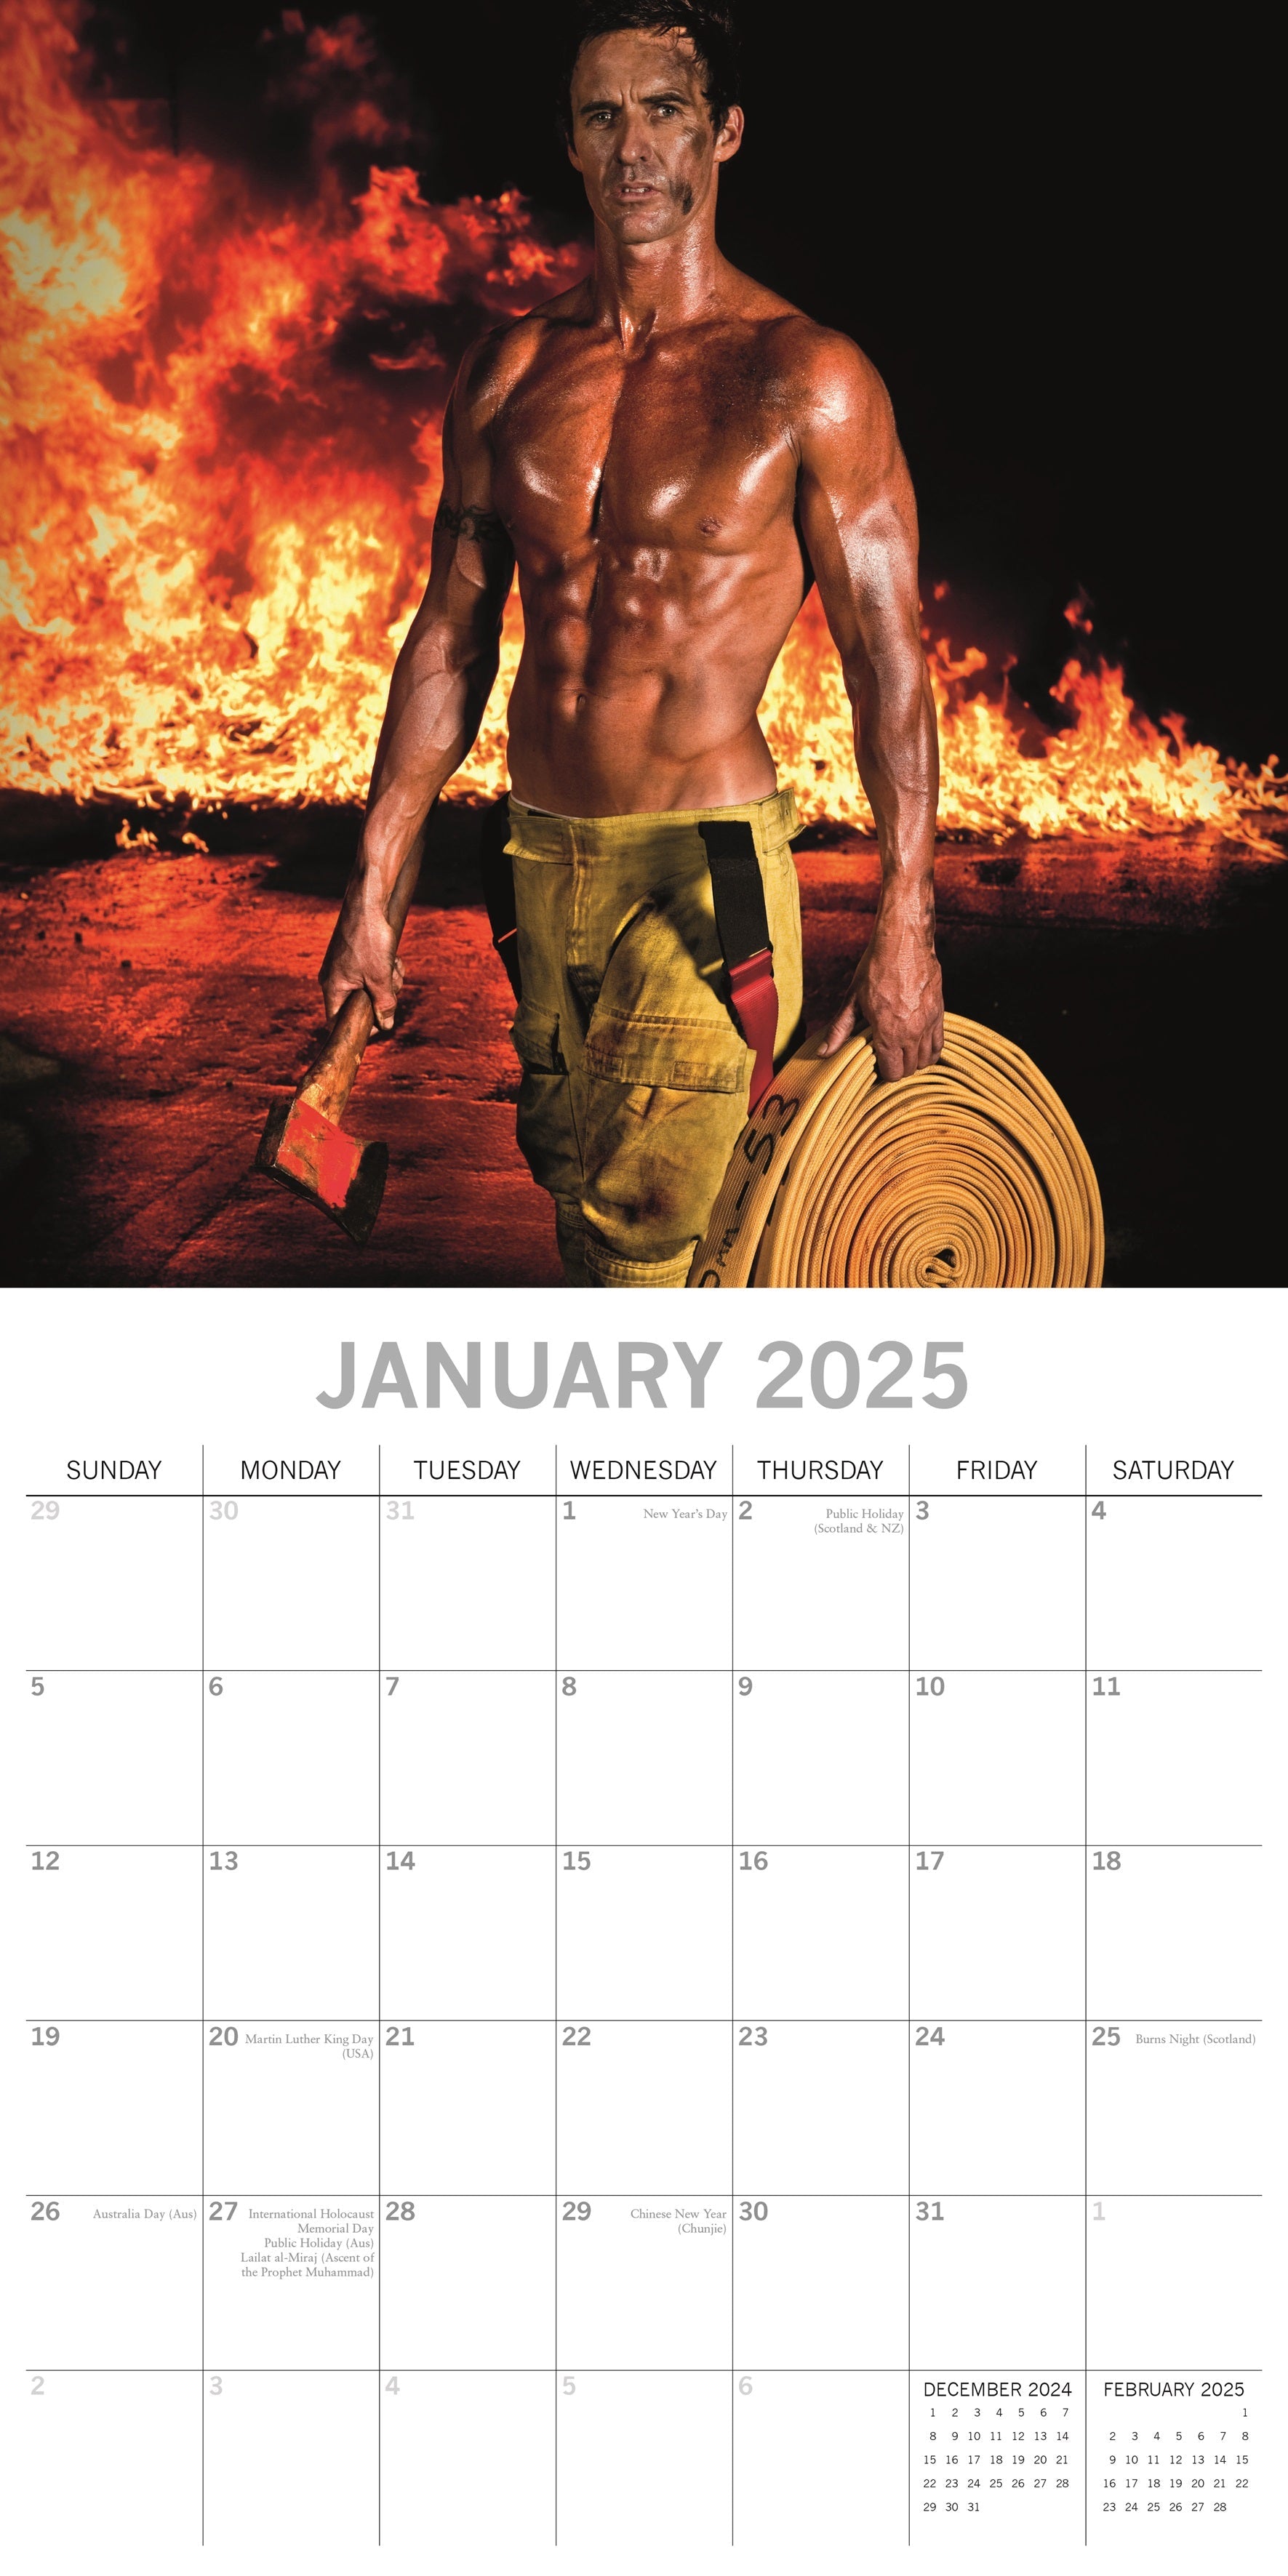 2025 Firefighters - Square Wall Calendar